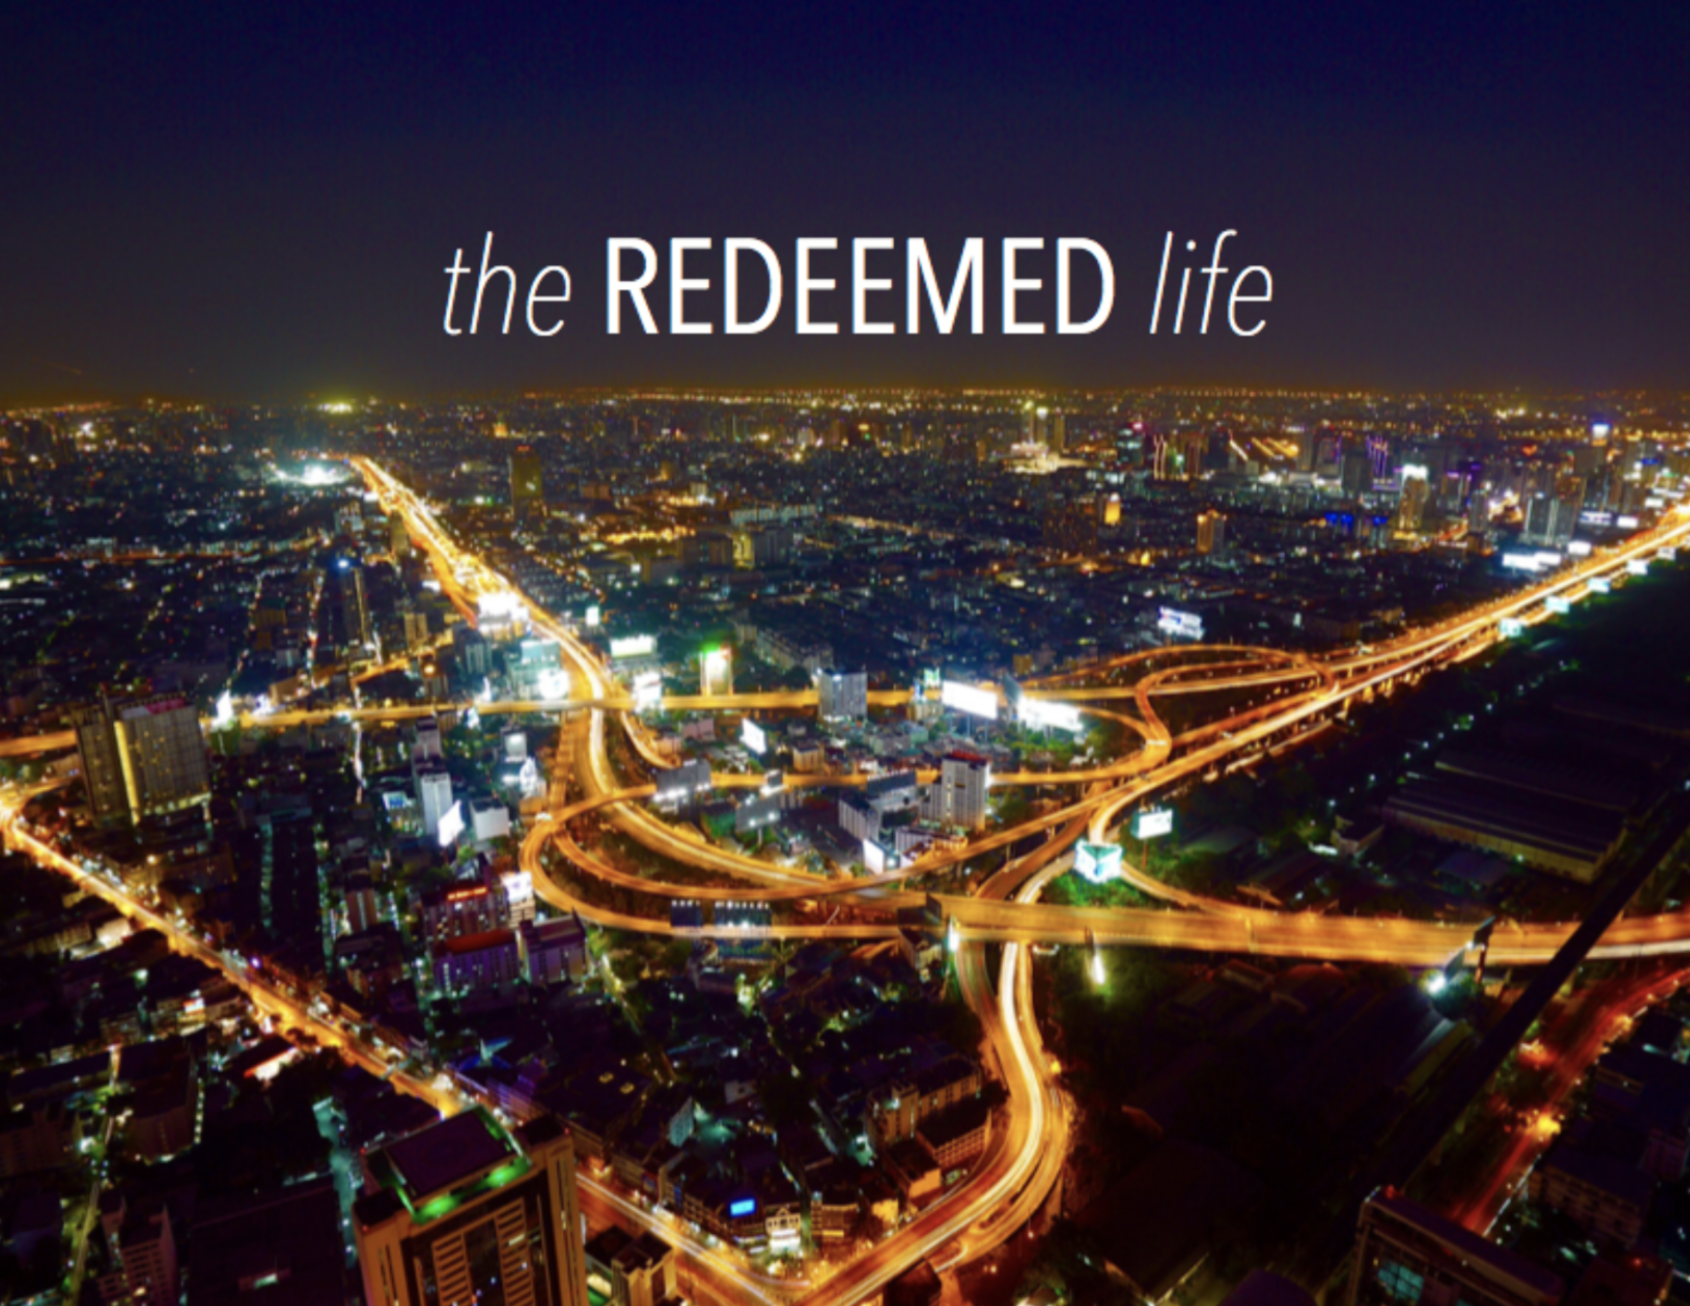 Eastertide 2017: The Redeemed Life